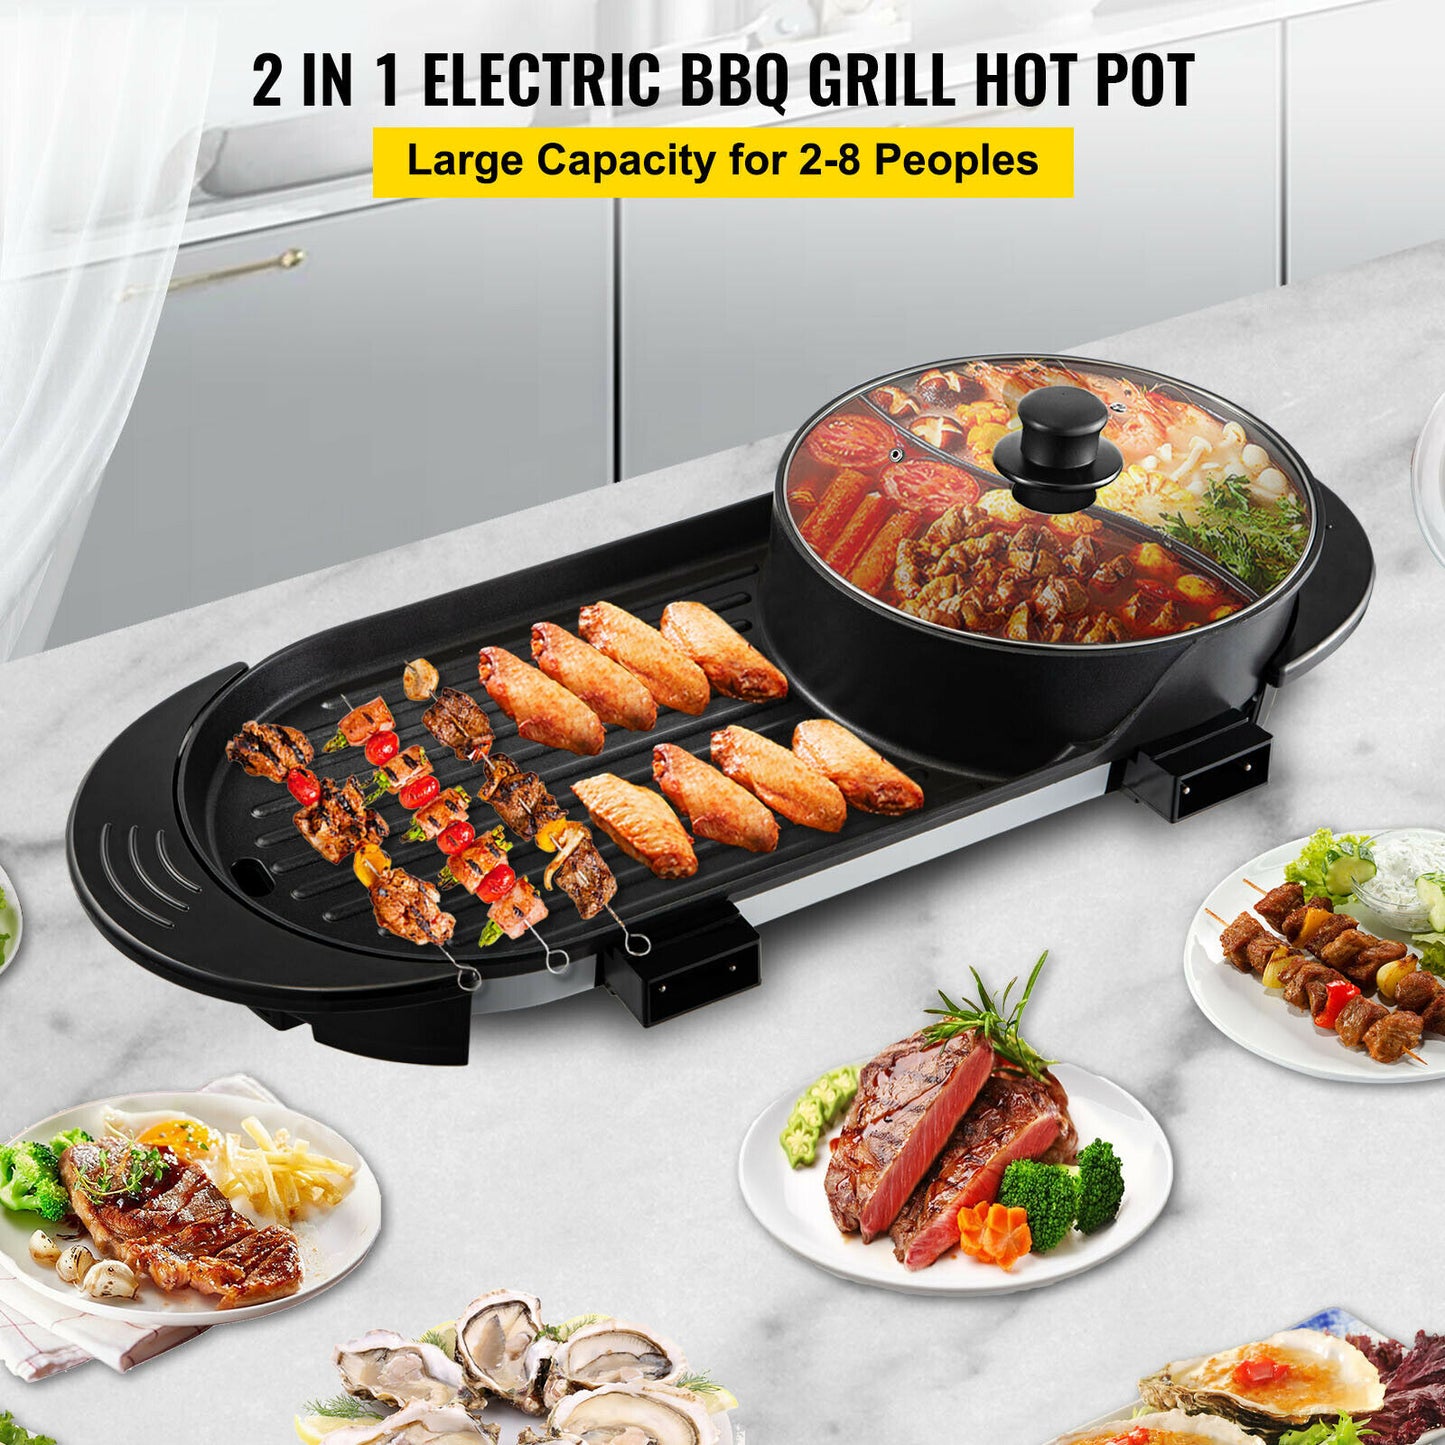 VEVOR 2 in 1 Electric BBQ Pan Grill Hot Pot Portable Smokeless Durable Material Fast Even Heated for Shellfish Vegetables Home